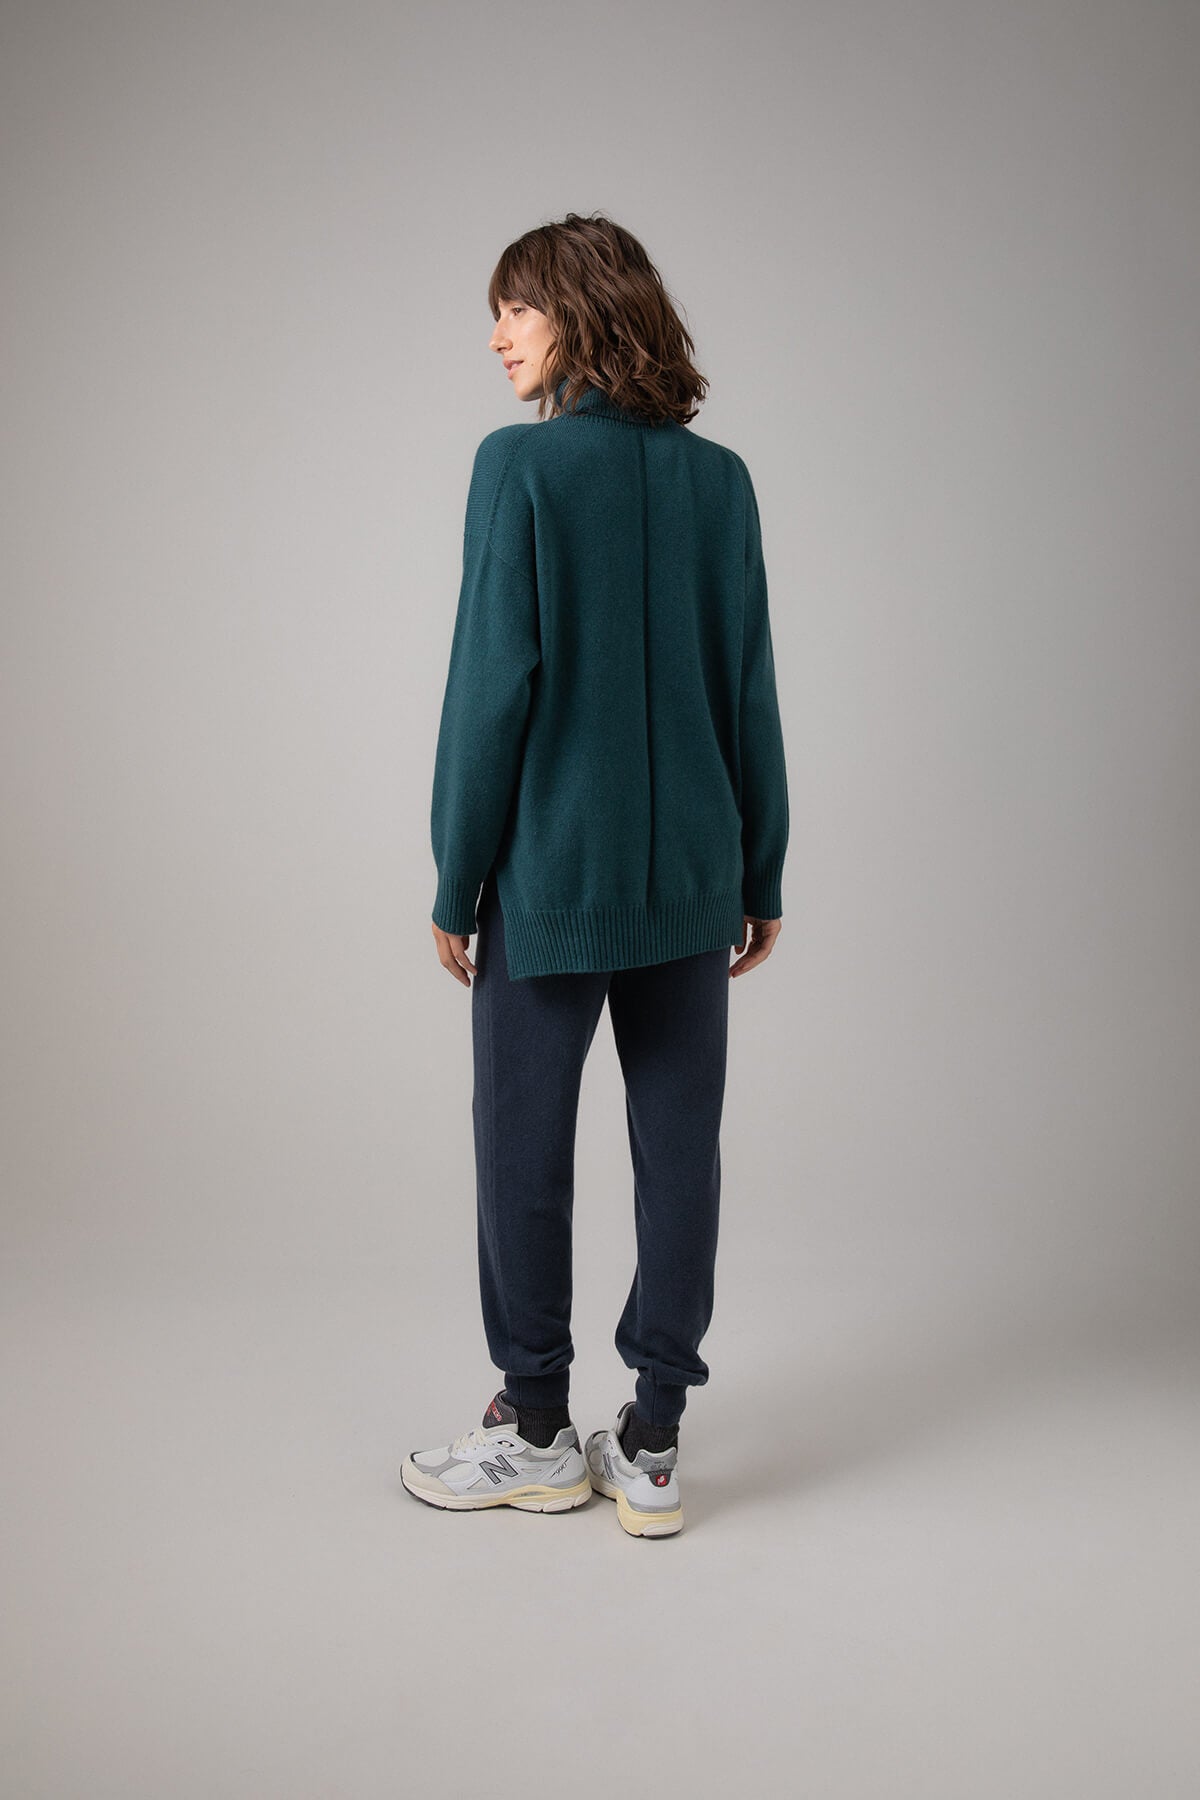 Back view of Johnstons of Elgin Women's Gauzy Cashmere Roll Neck with Stepped Hem in Mallard on a grey background KAI05100HC7126